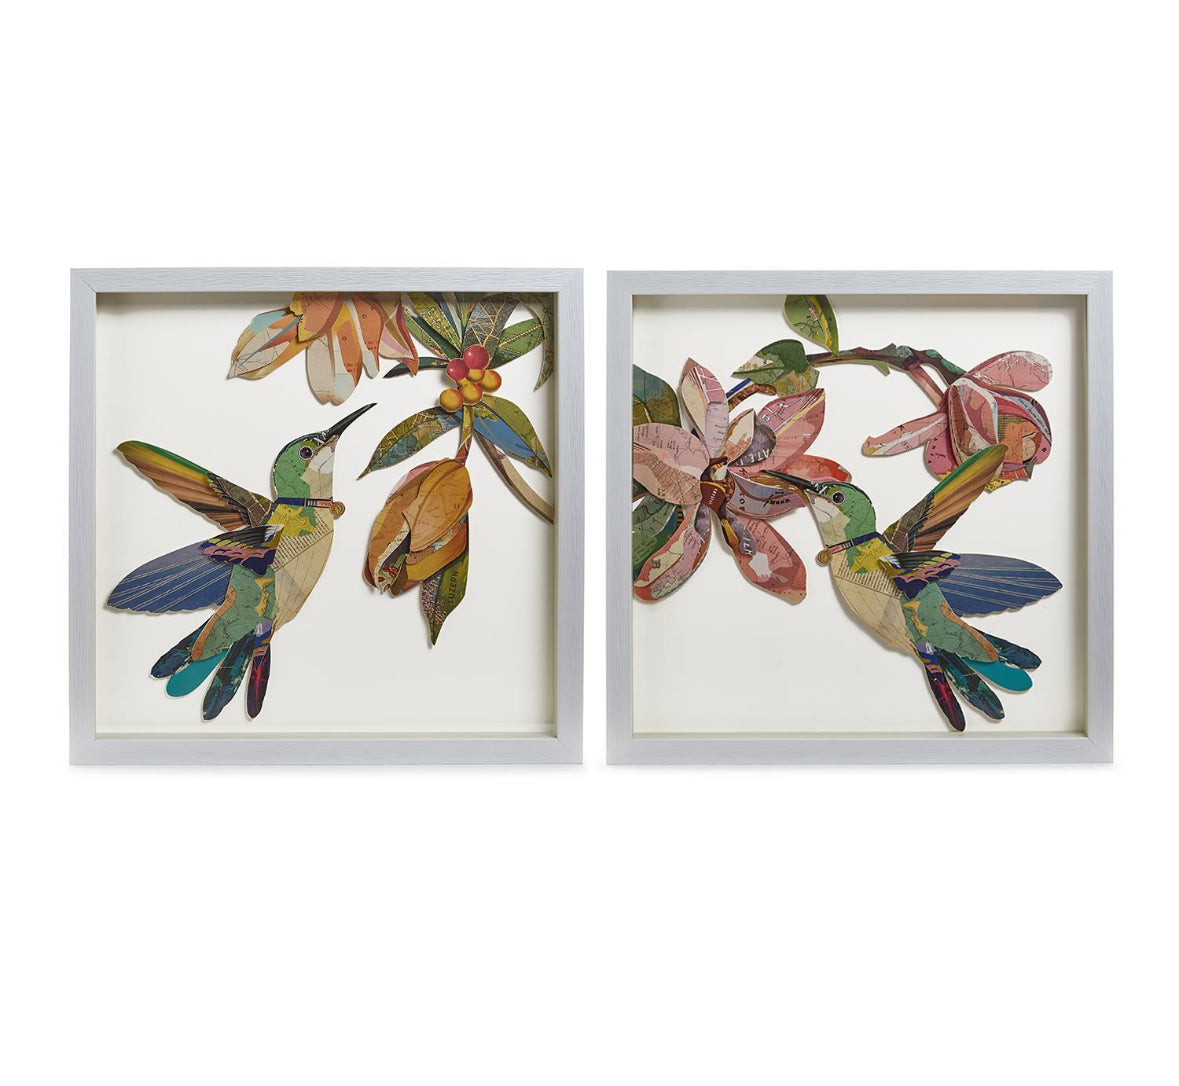 Hummingbird Paper Collage Wall Art Set of 2 - PICK UP ONLY